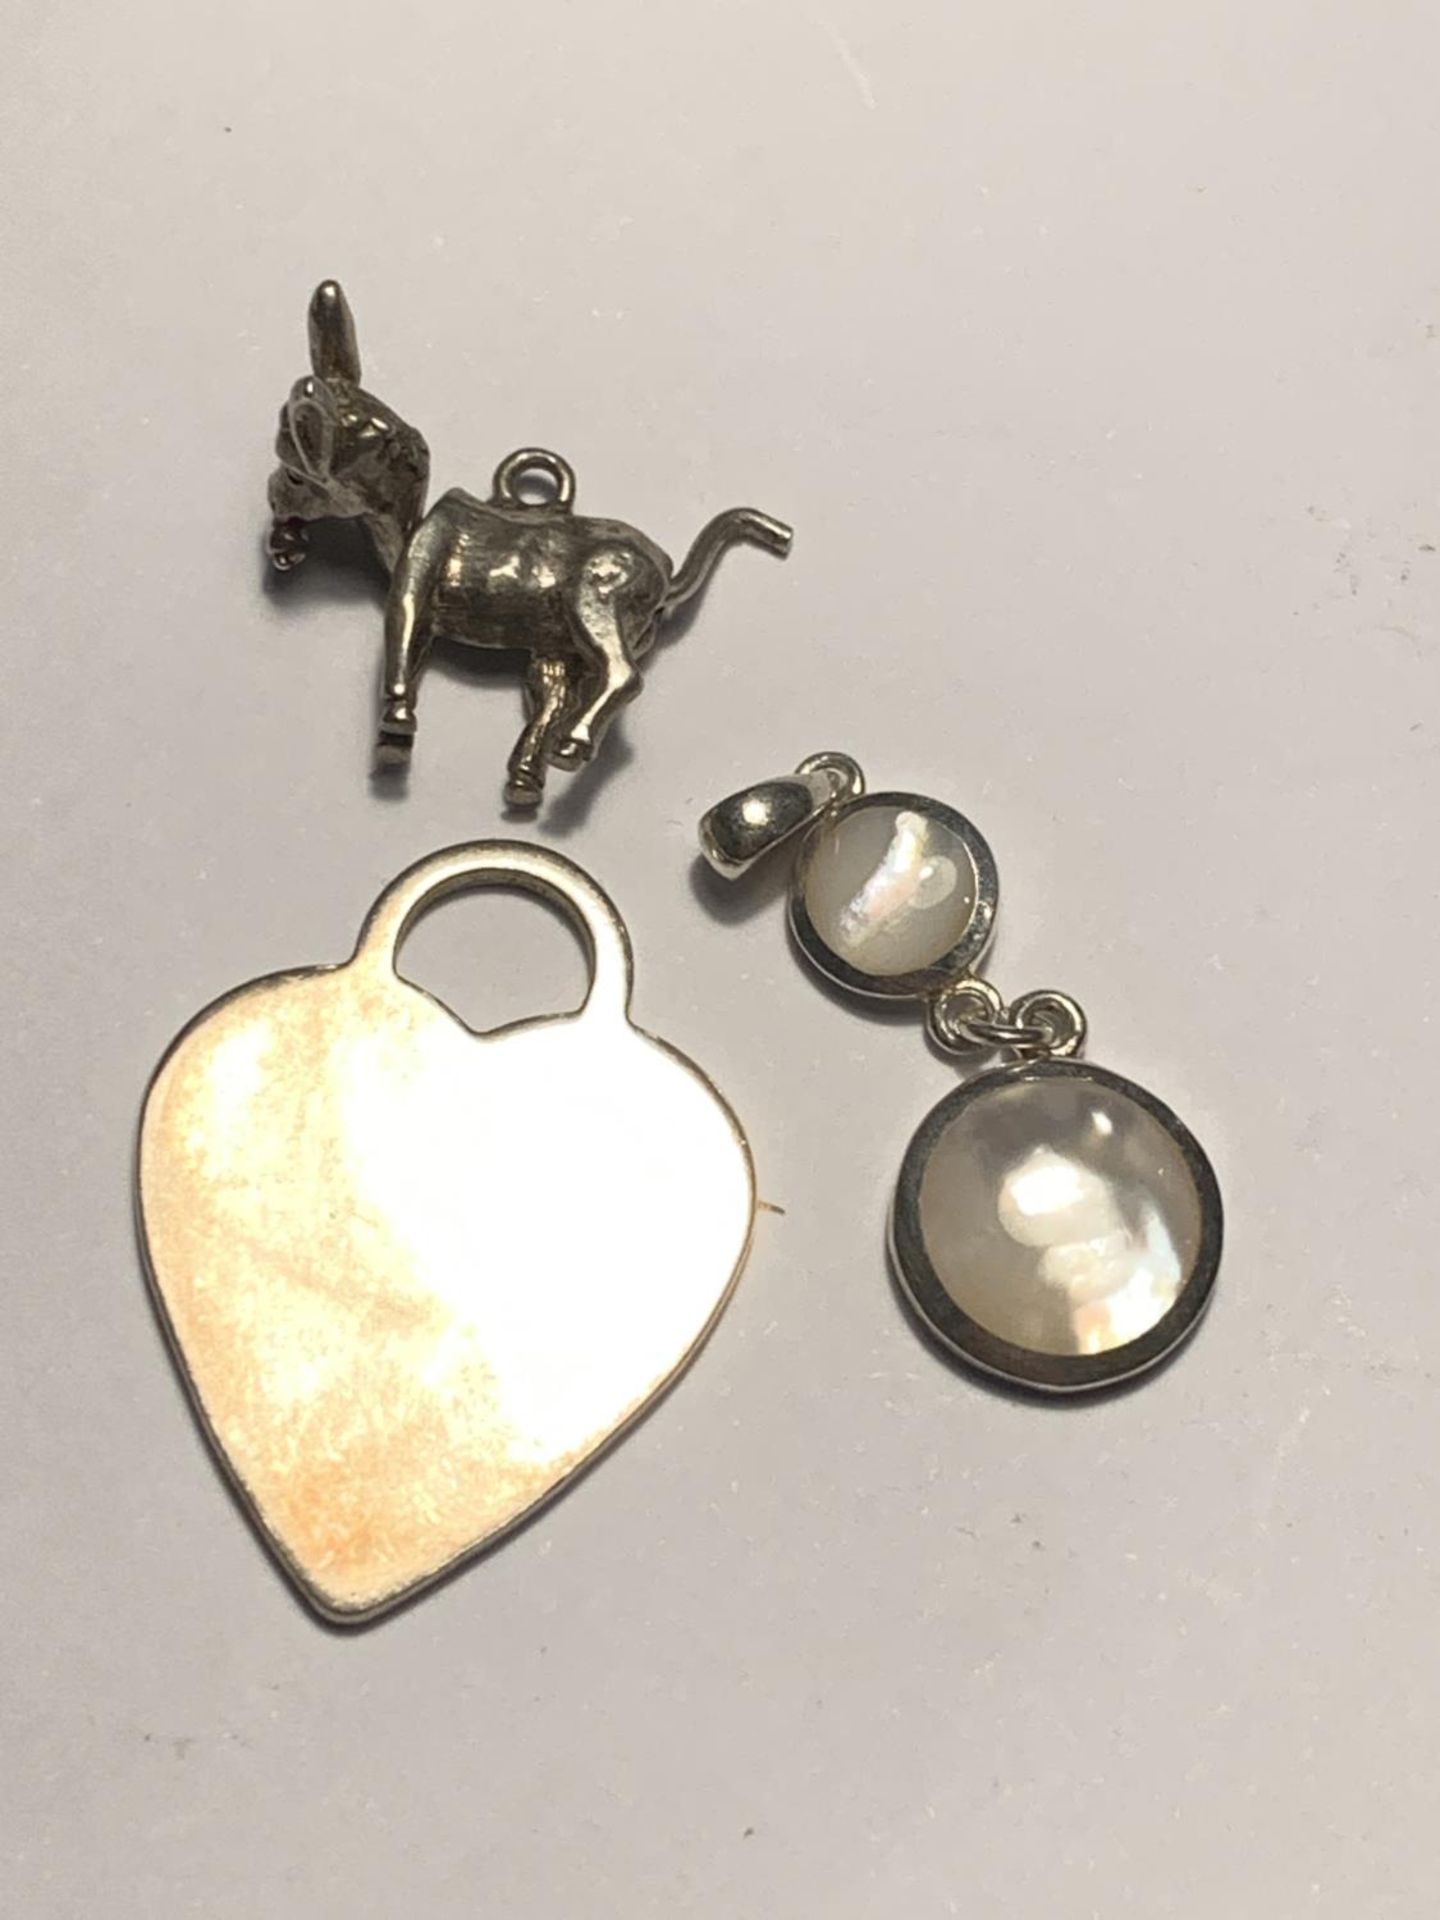 VARIOUS ITEMS TO INCLUDE A DONKEY CHARM, SILVER SPOONS ETC - Image 2 of 4